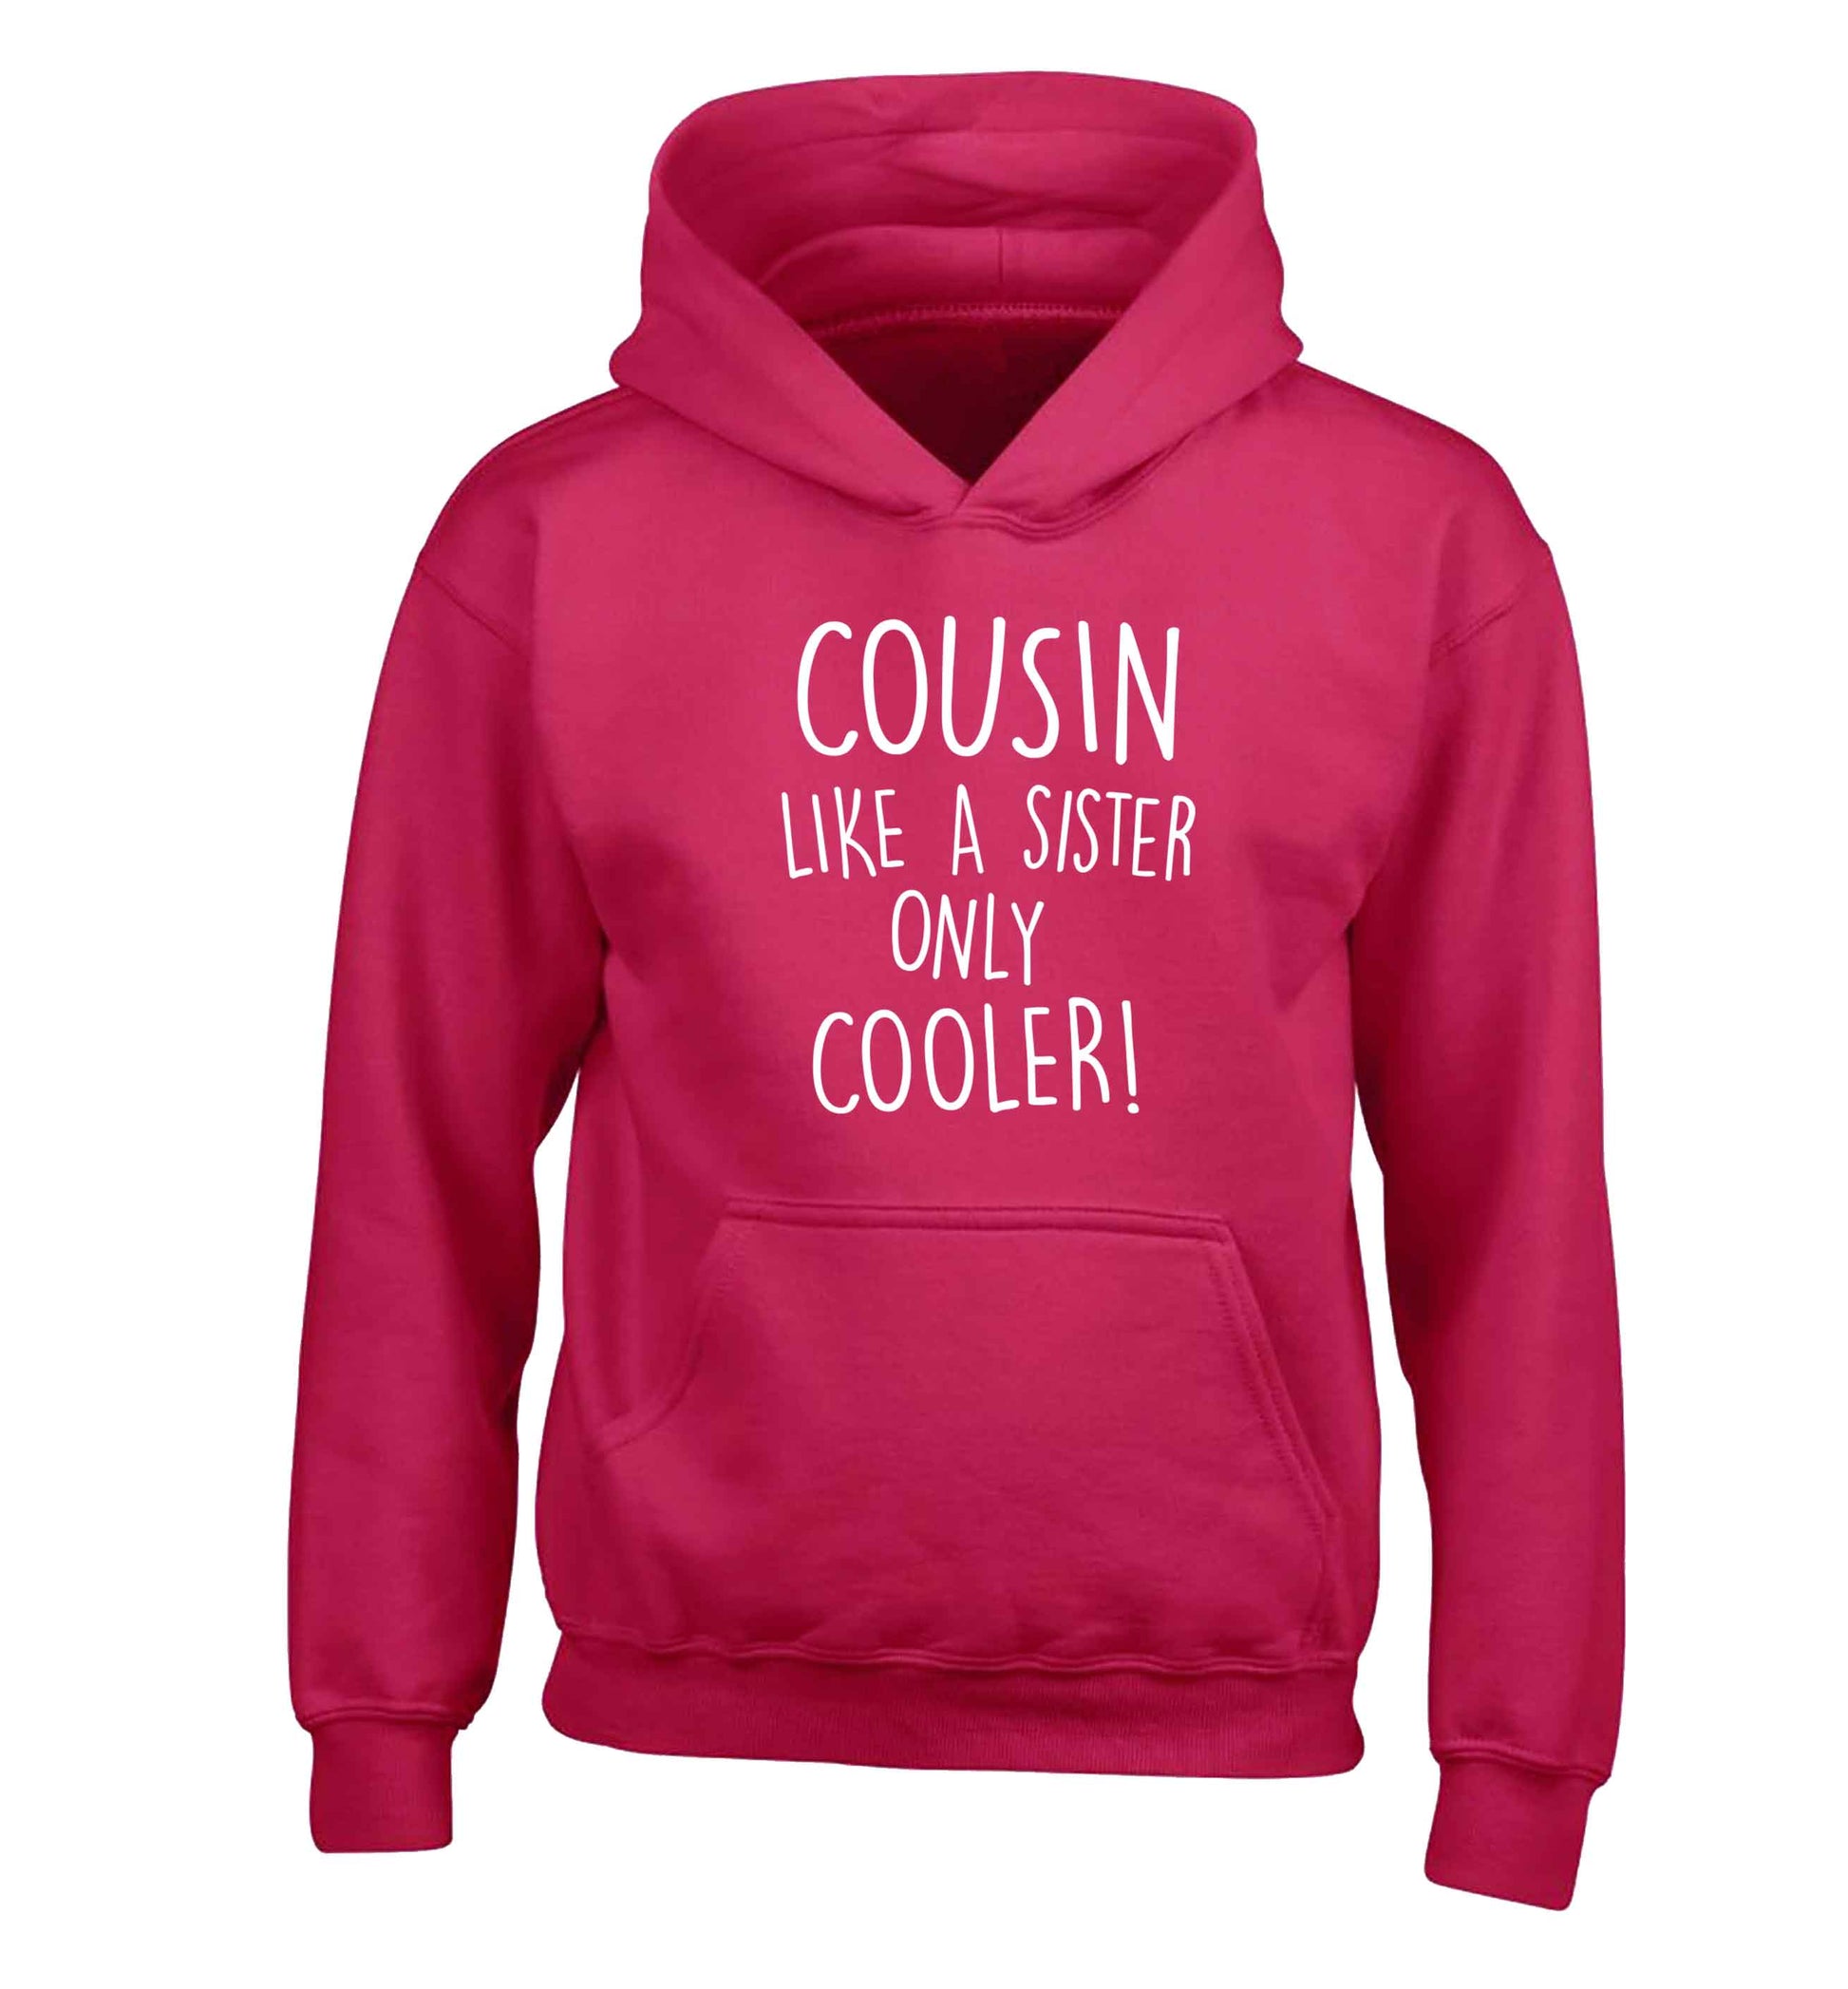 Cousin like a sister only cooler children's pink hoodie 12-13 Years